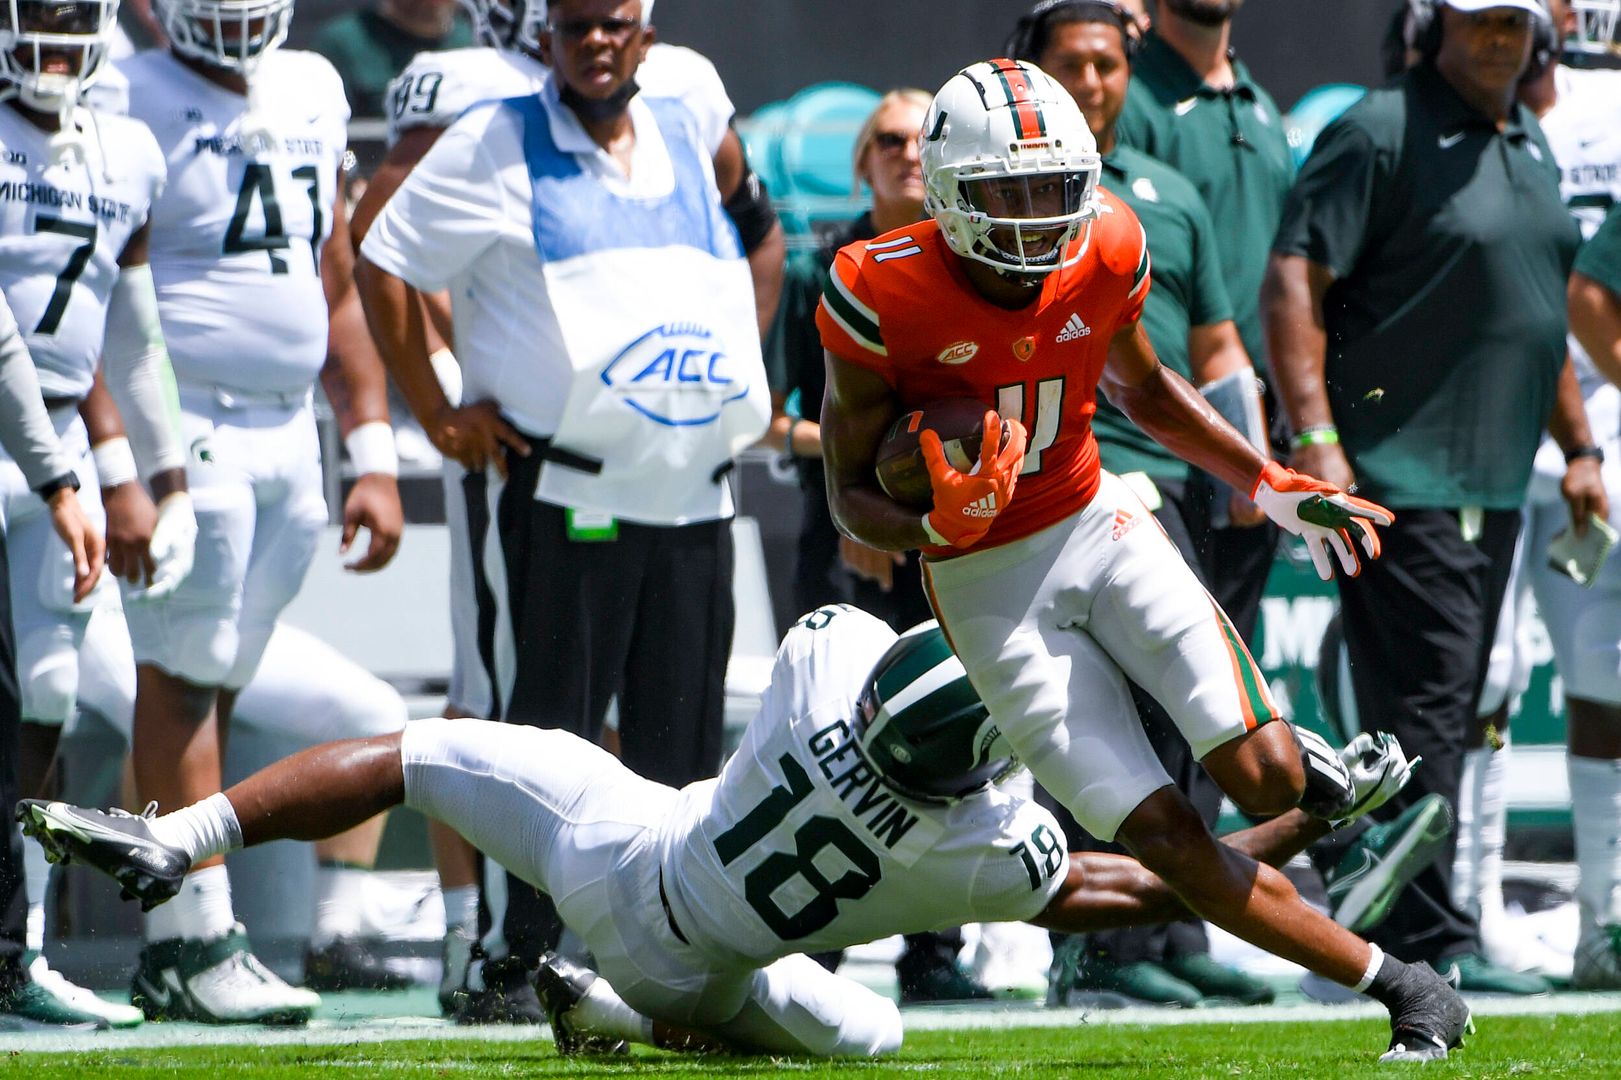 Canes Fall to Michigan State, 38-17